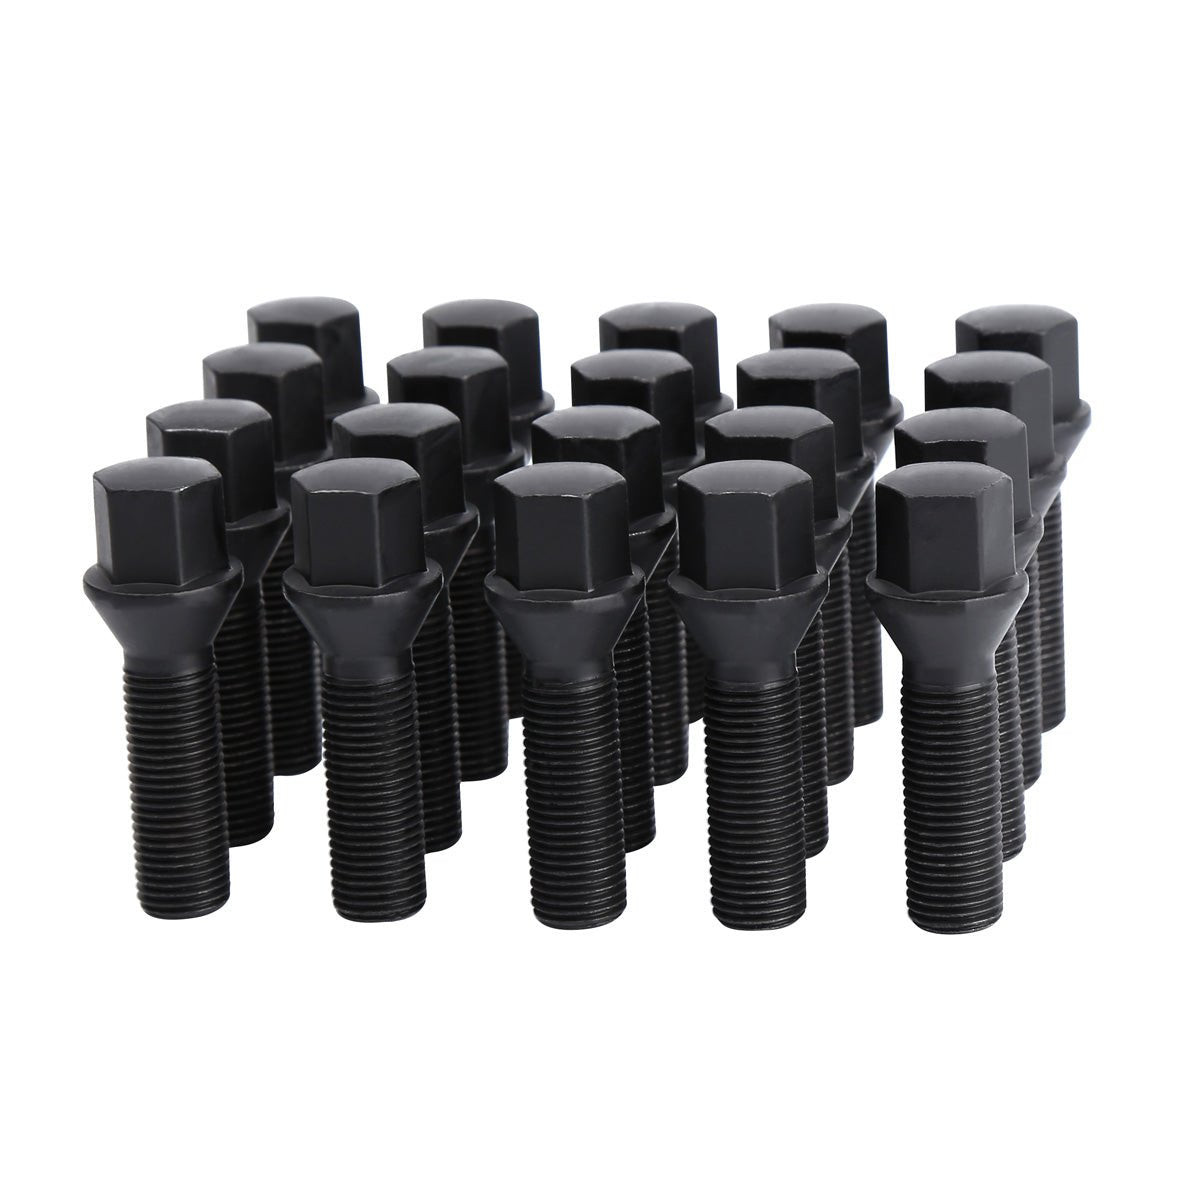 20pcs 40mm Shank Conical Seat M12x1.5 Aftermarket Lug Bolts For BMW Wheel Spacers xccscss.